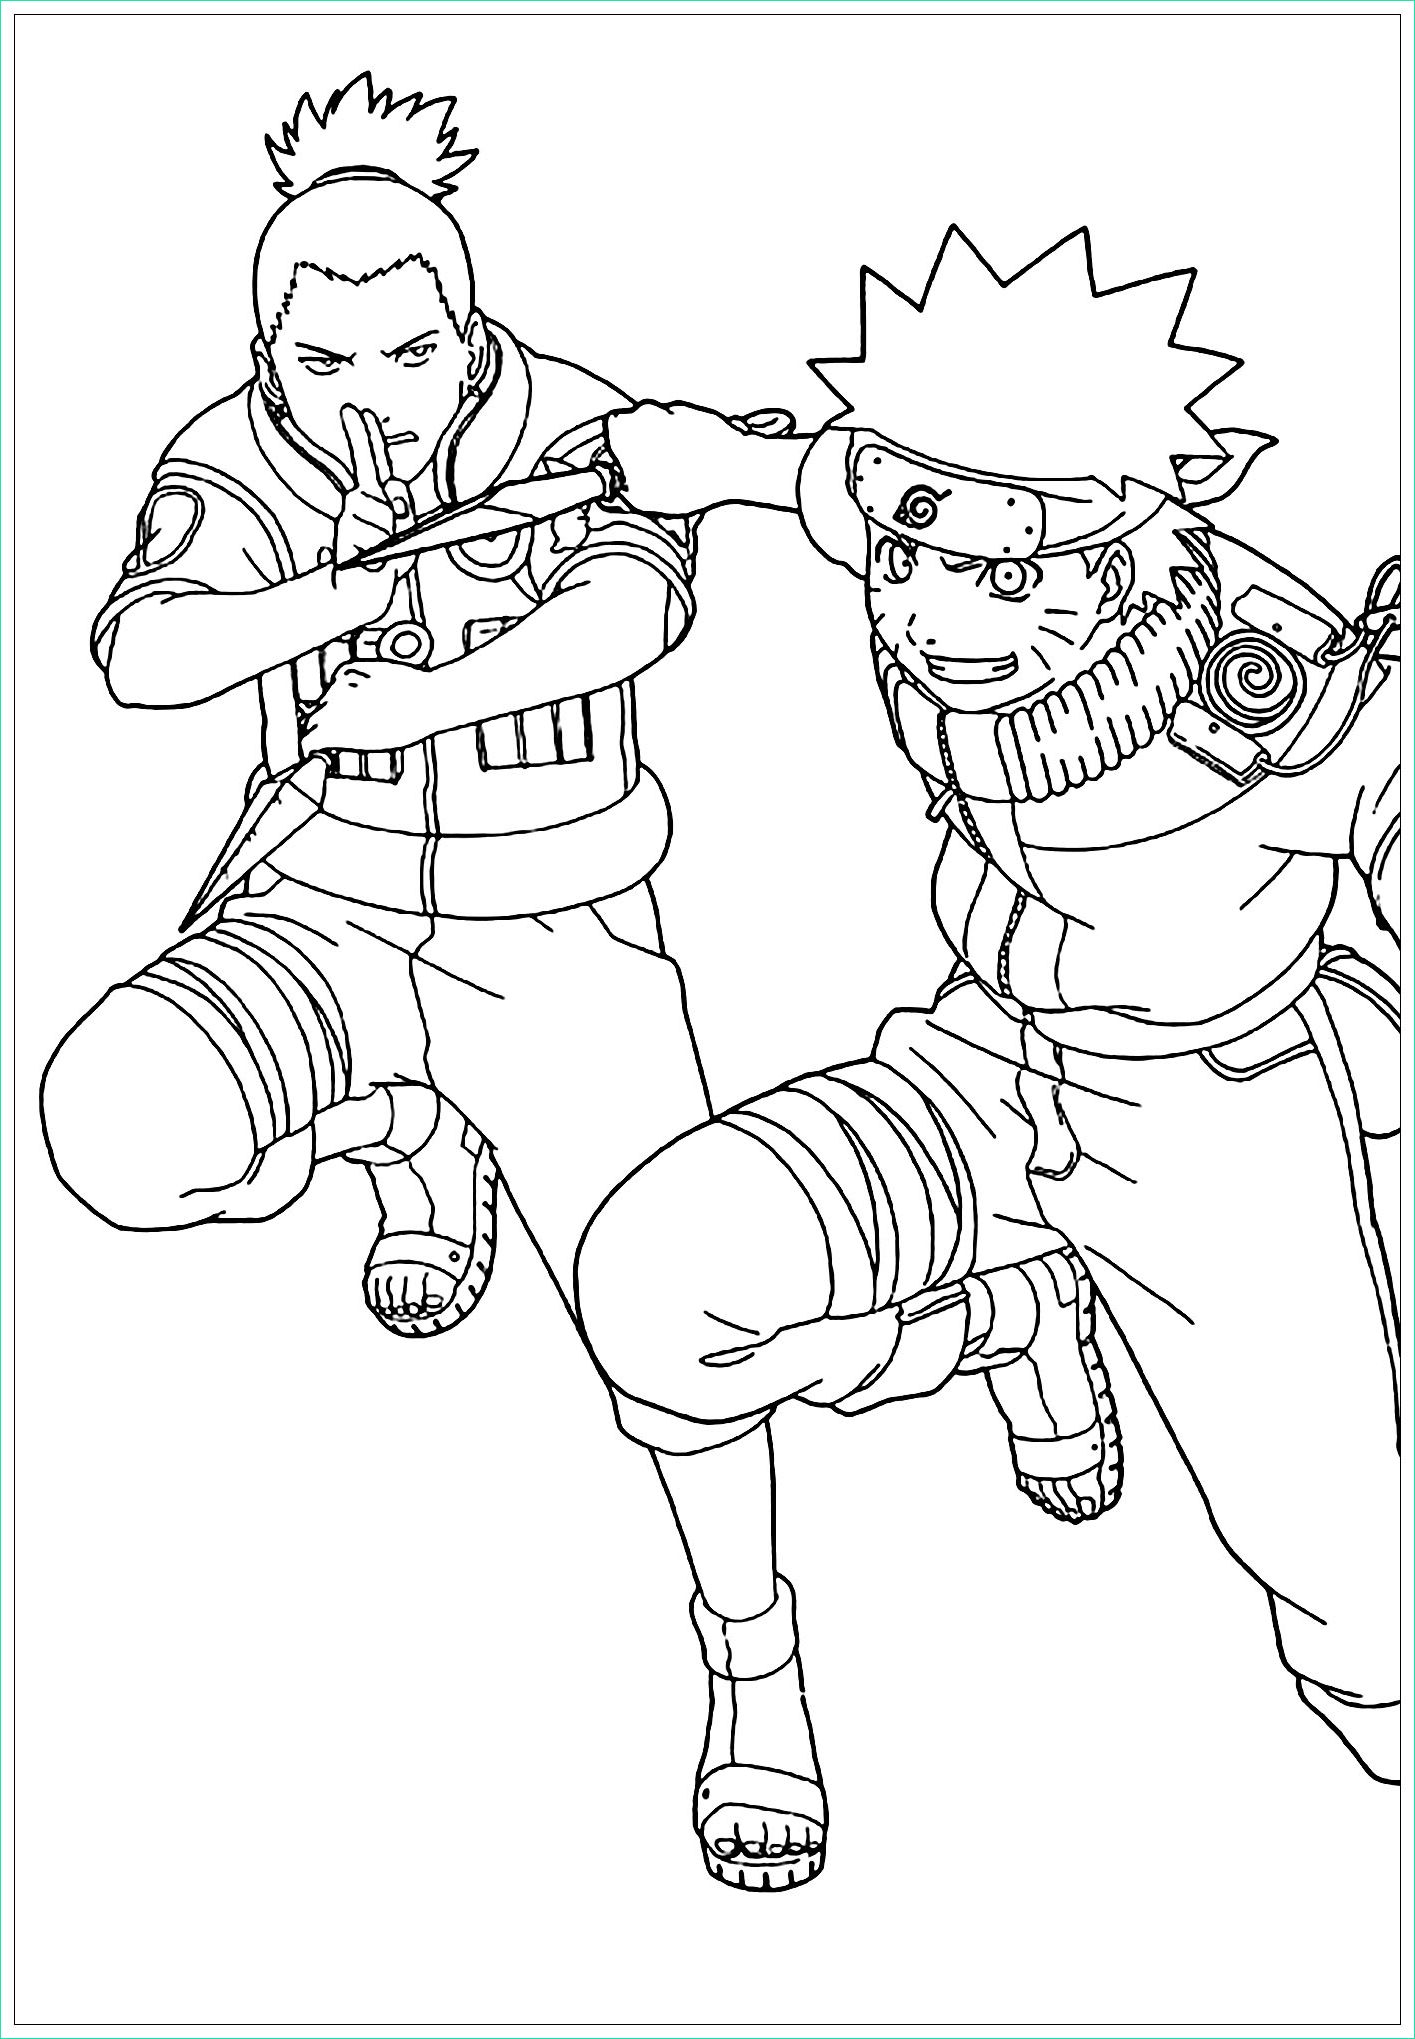 Naruto Coloriage Beau Photos Naruto to Color for Children Naruto Kids Coloring Pages